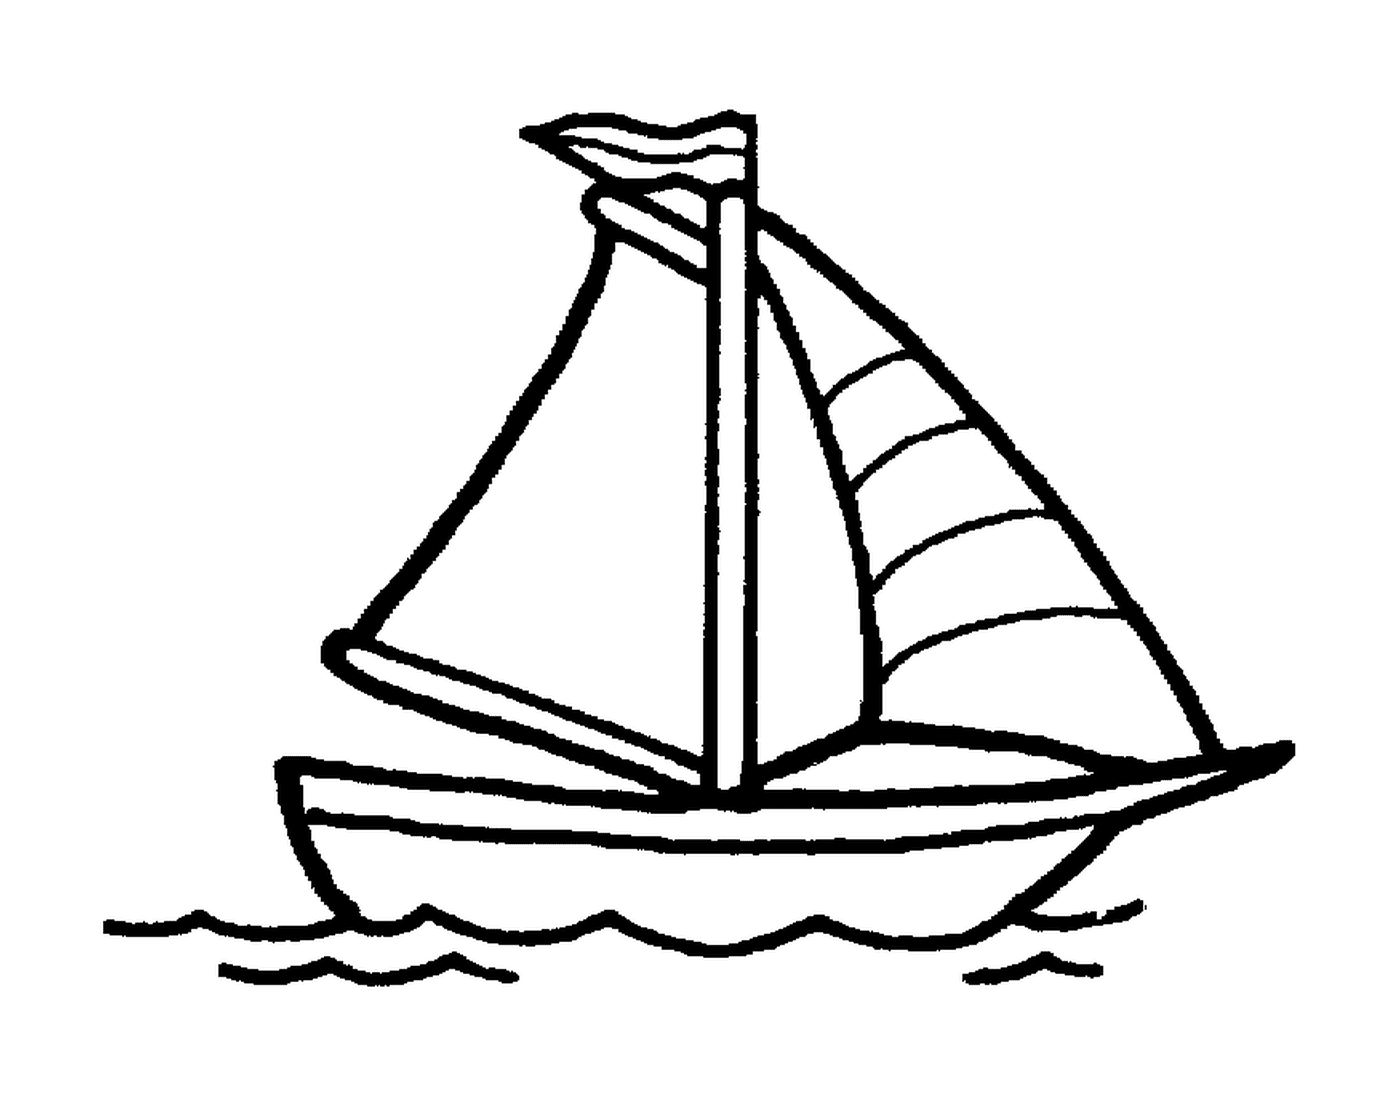  A small ship is shown 